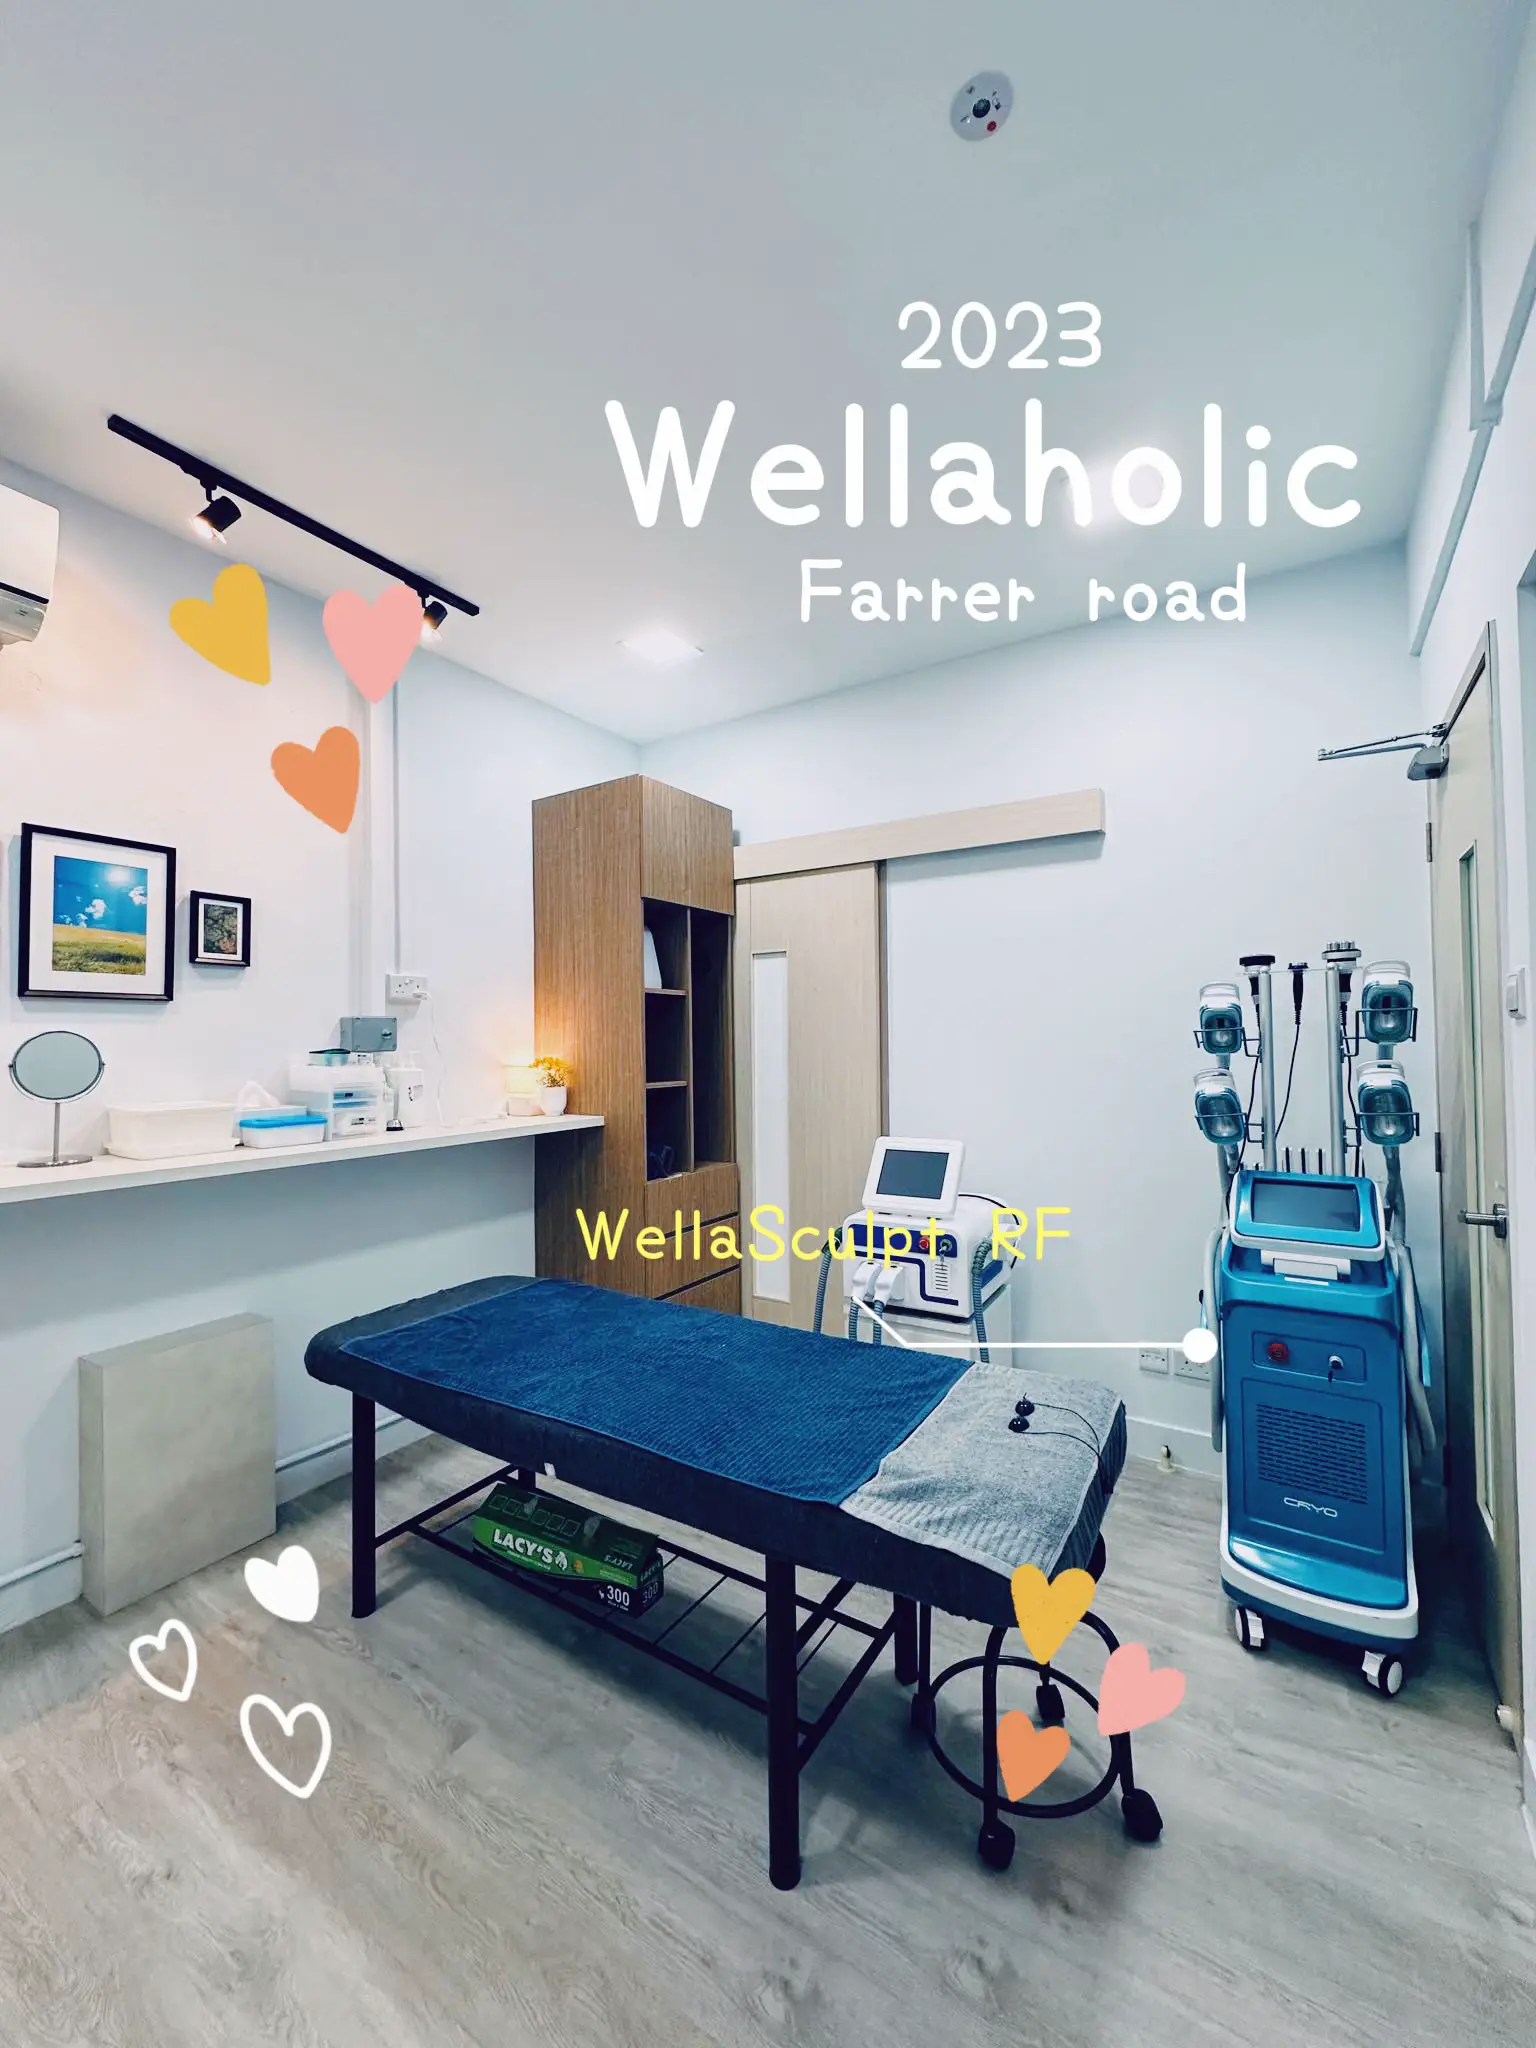 Sculpted Transformation at Wellaholic Farrer Road's images